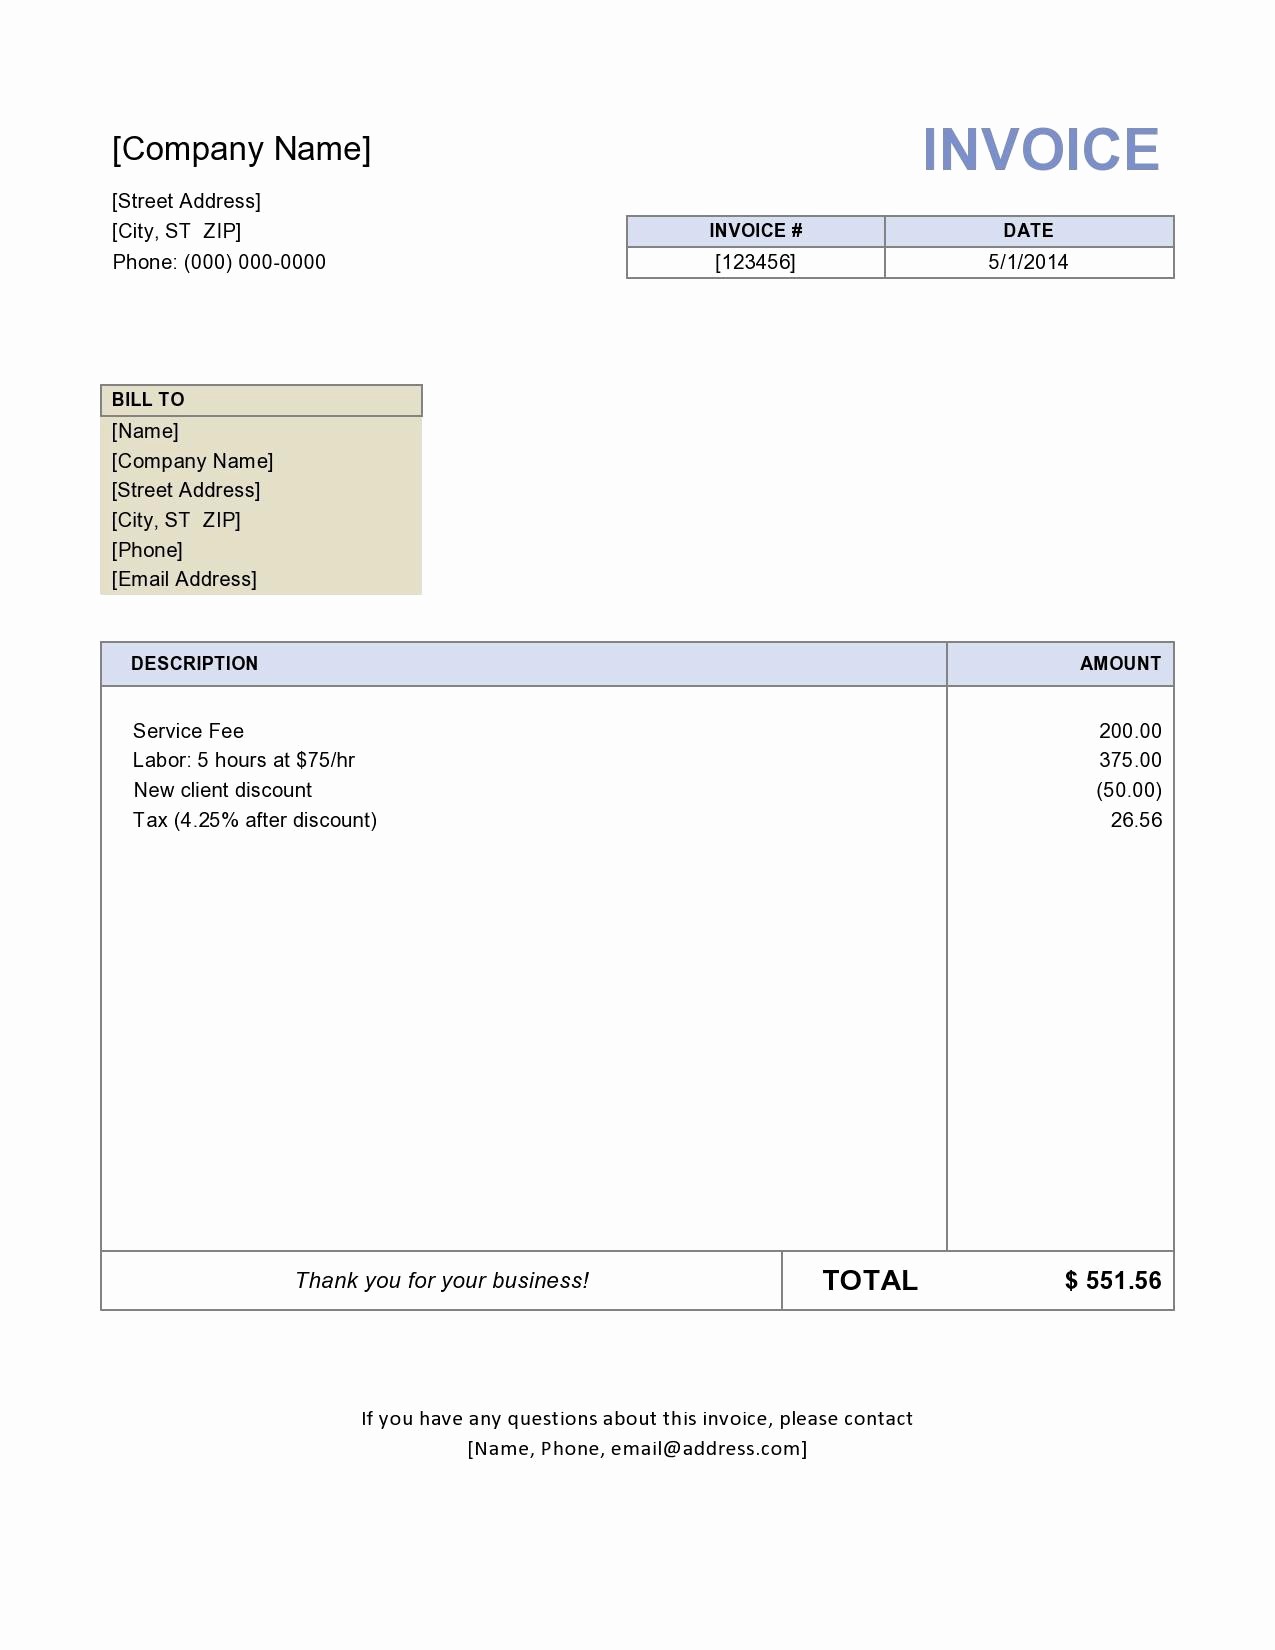 Sample Receipts for Services Rendered Inspirational Sample Invoice for Services Rendered Template